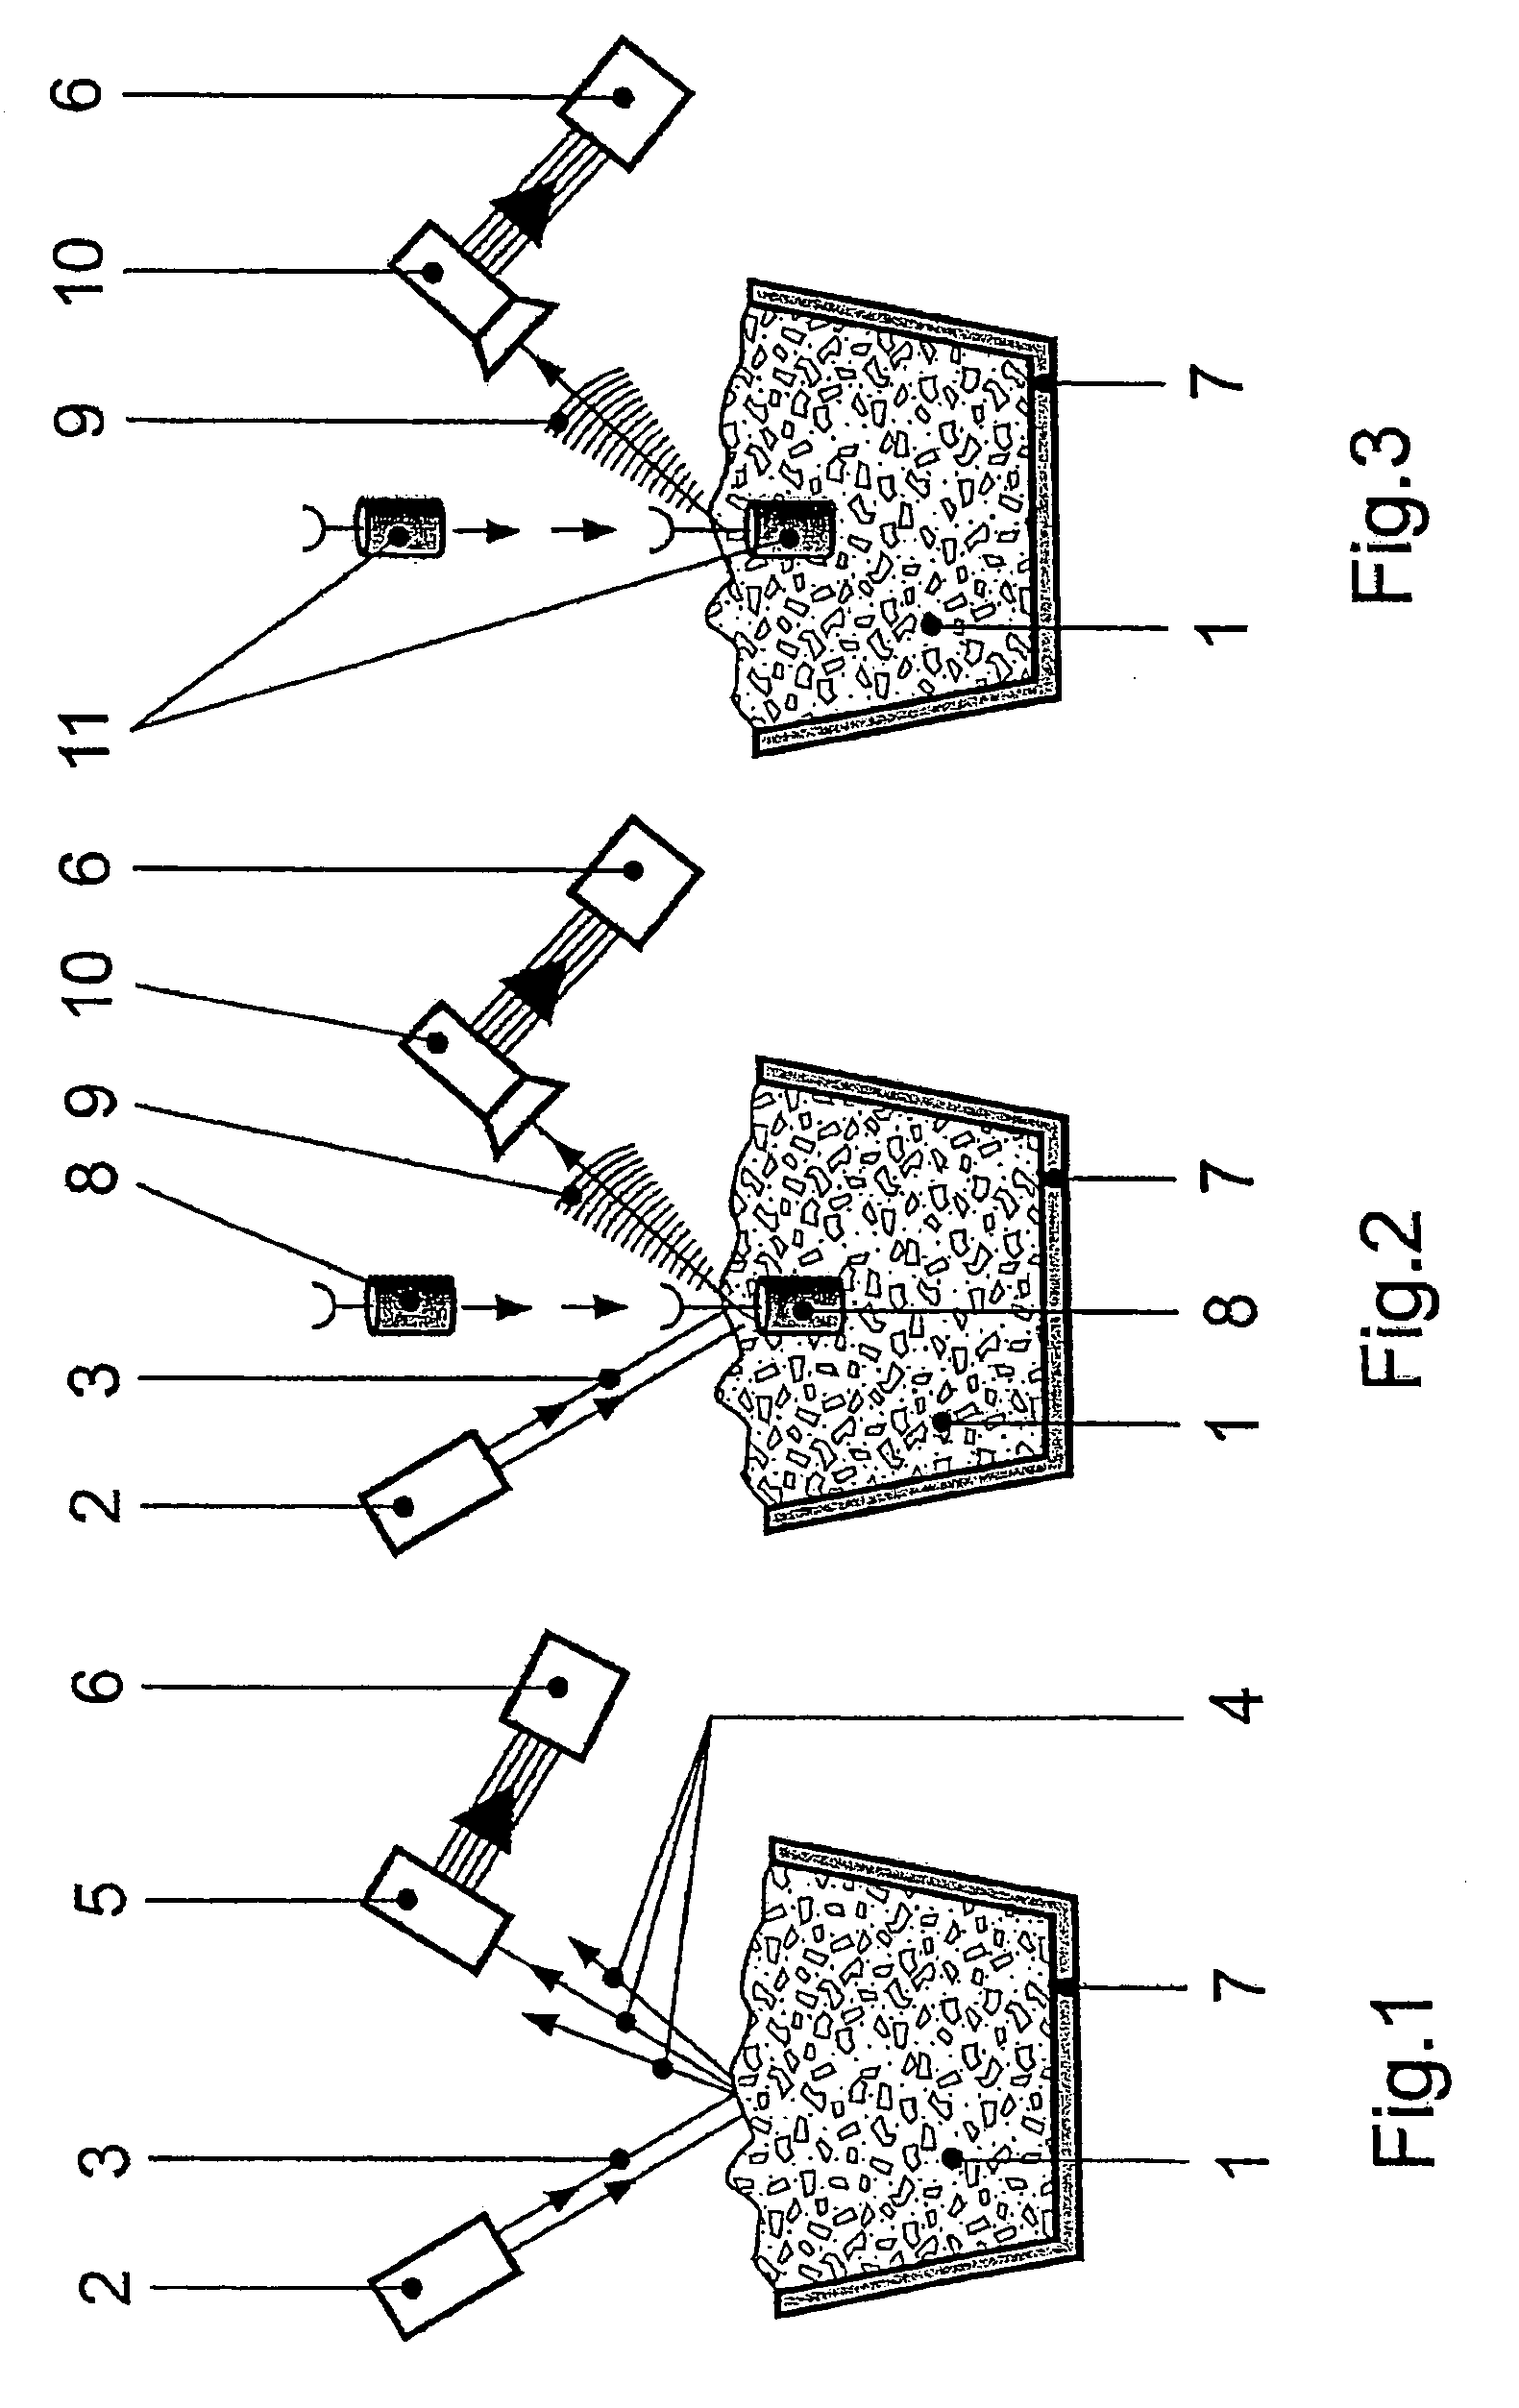 Method for analysis of a molten material, device and immersion sensor